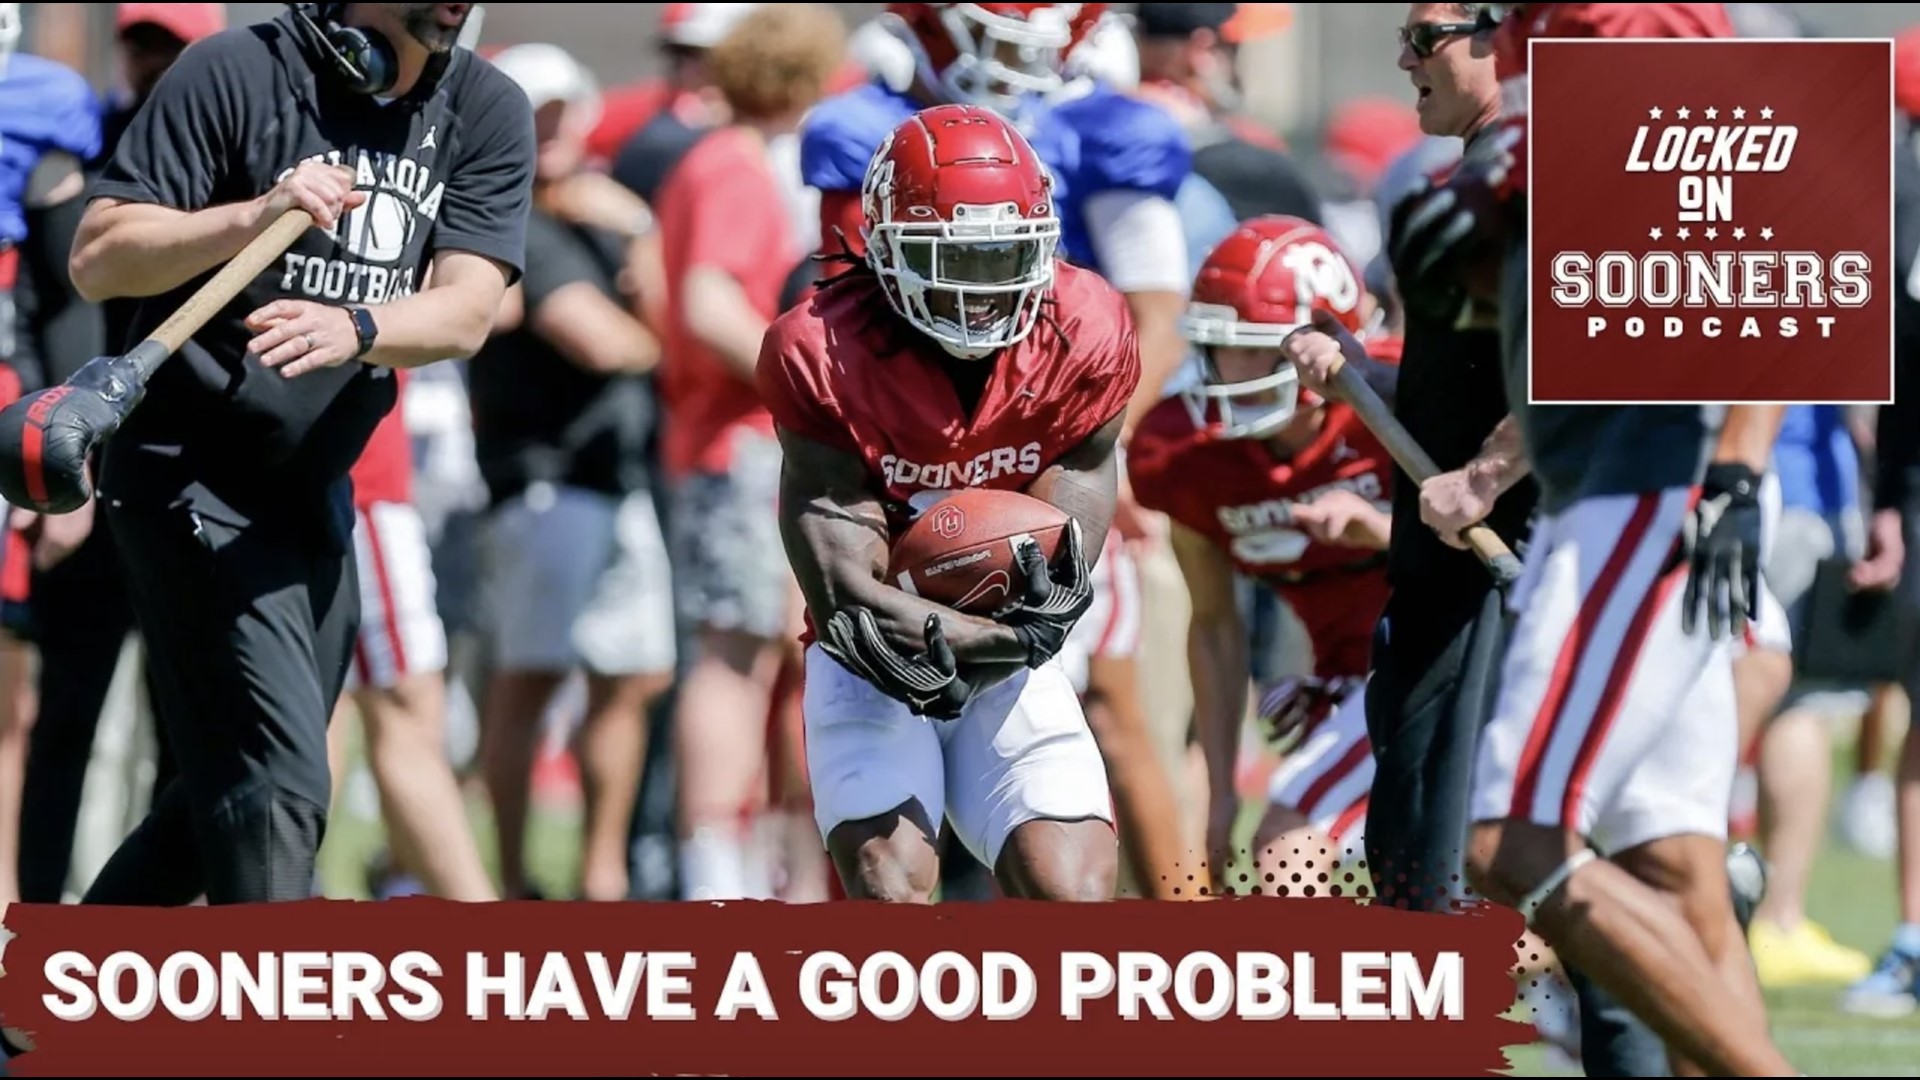 In the spring transfer portal window, the Oklahoma Sooners are dealing with one of those good problems.